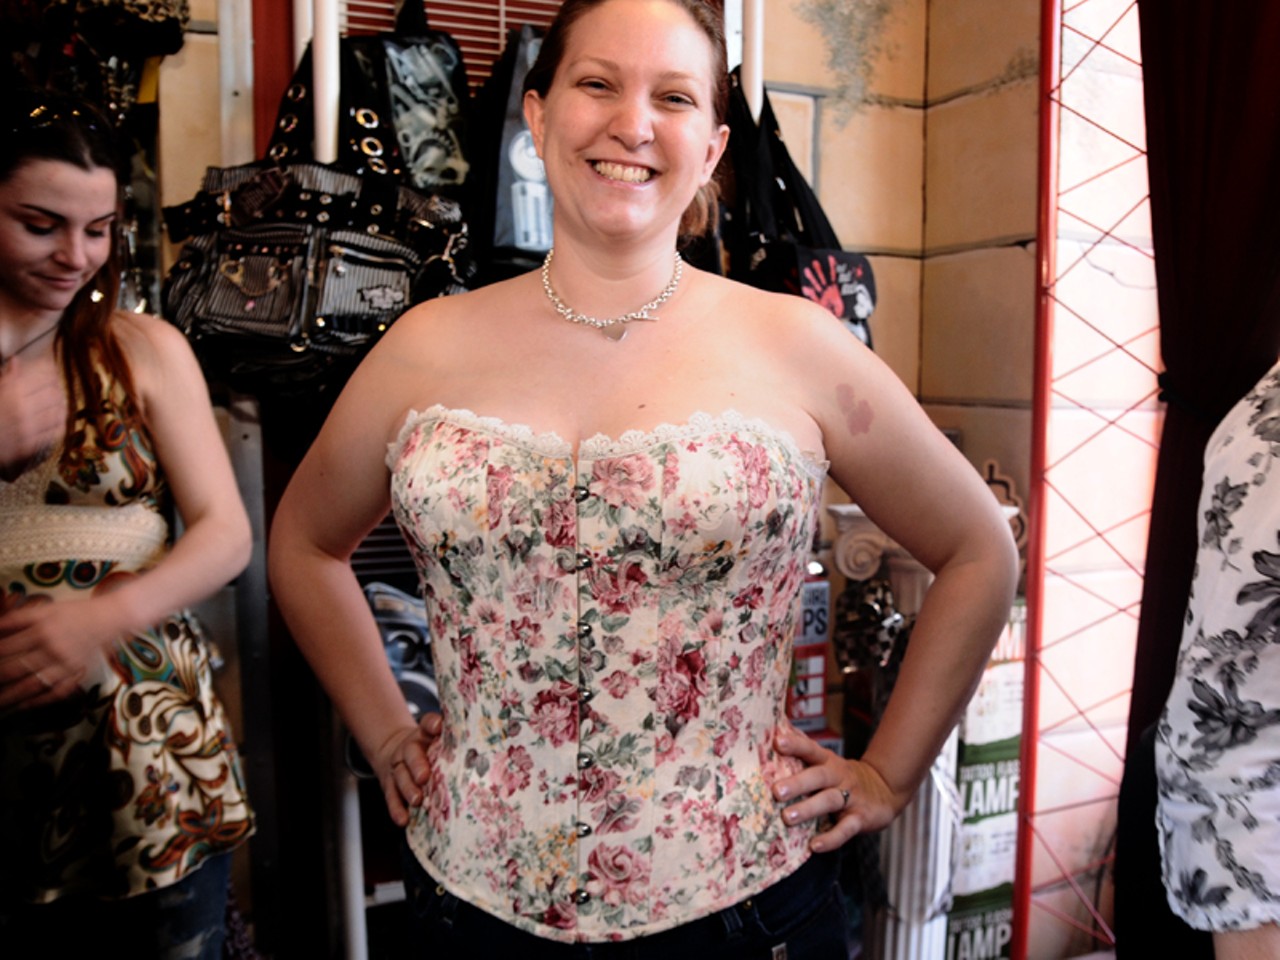 In fact, she states the off-the-rack corset is a lot more uncomfortable.